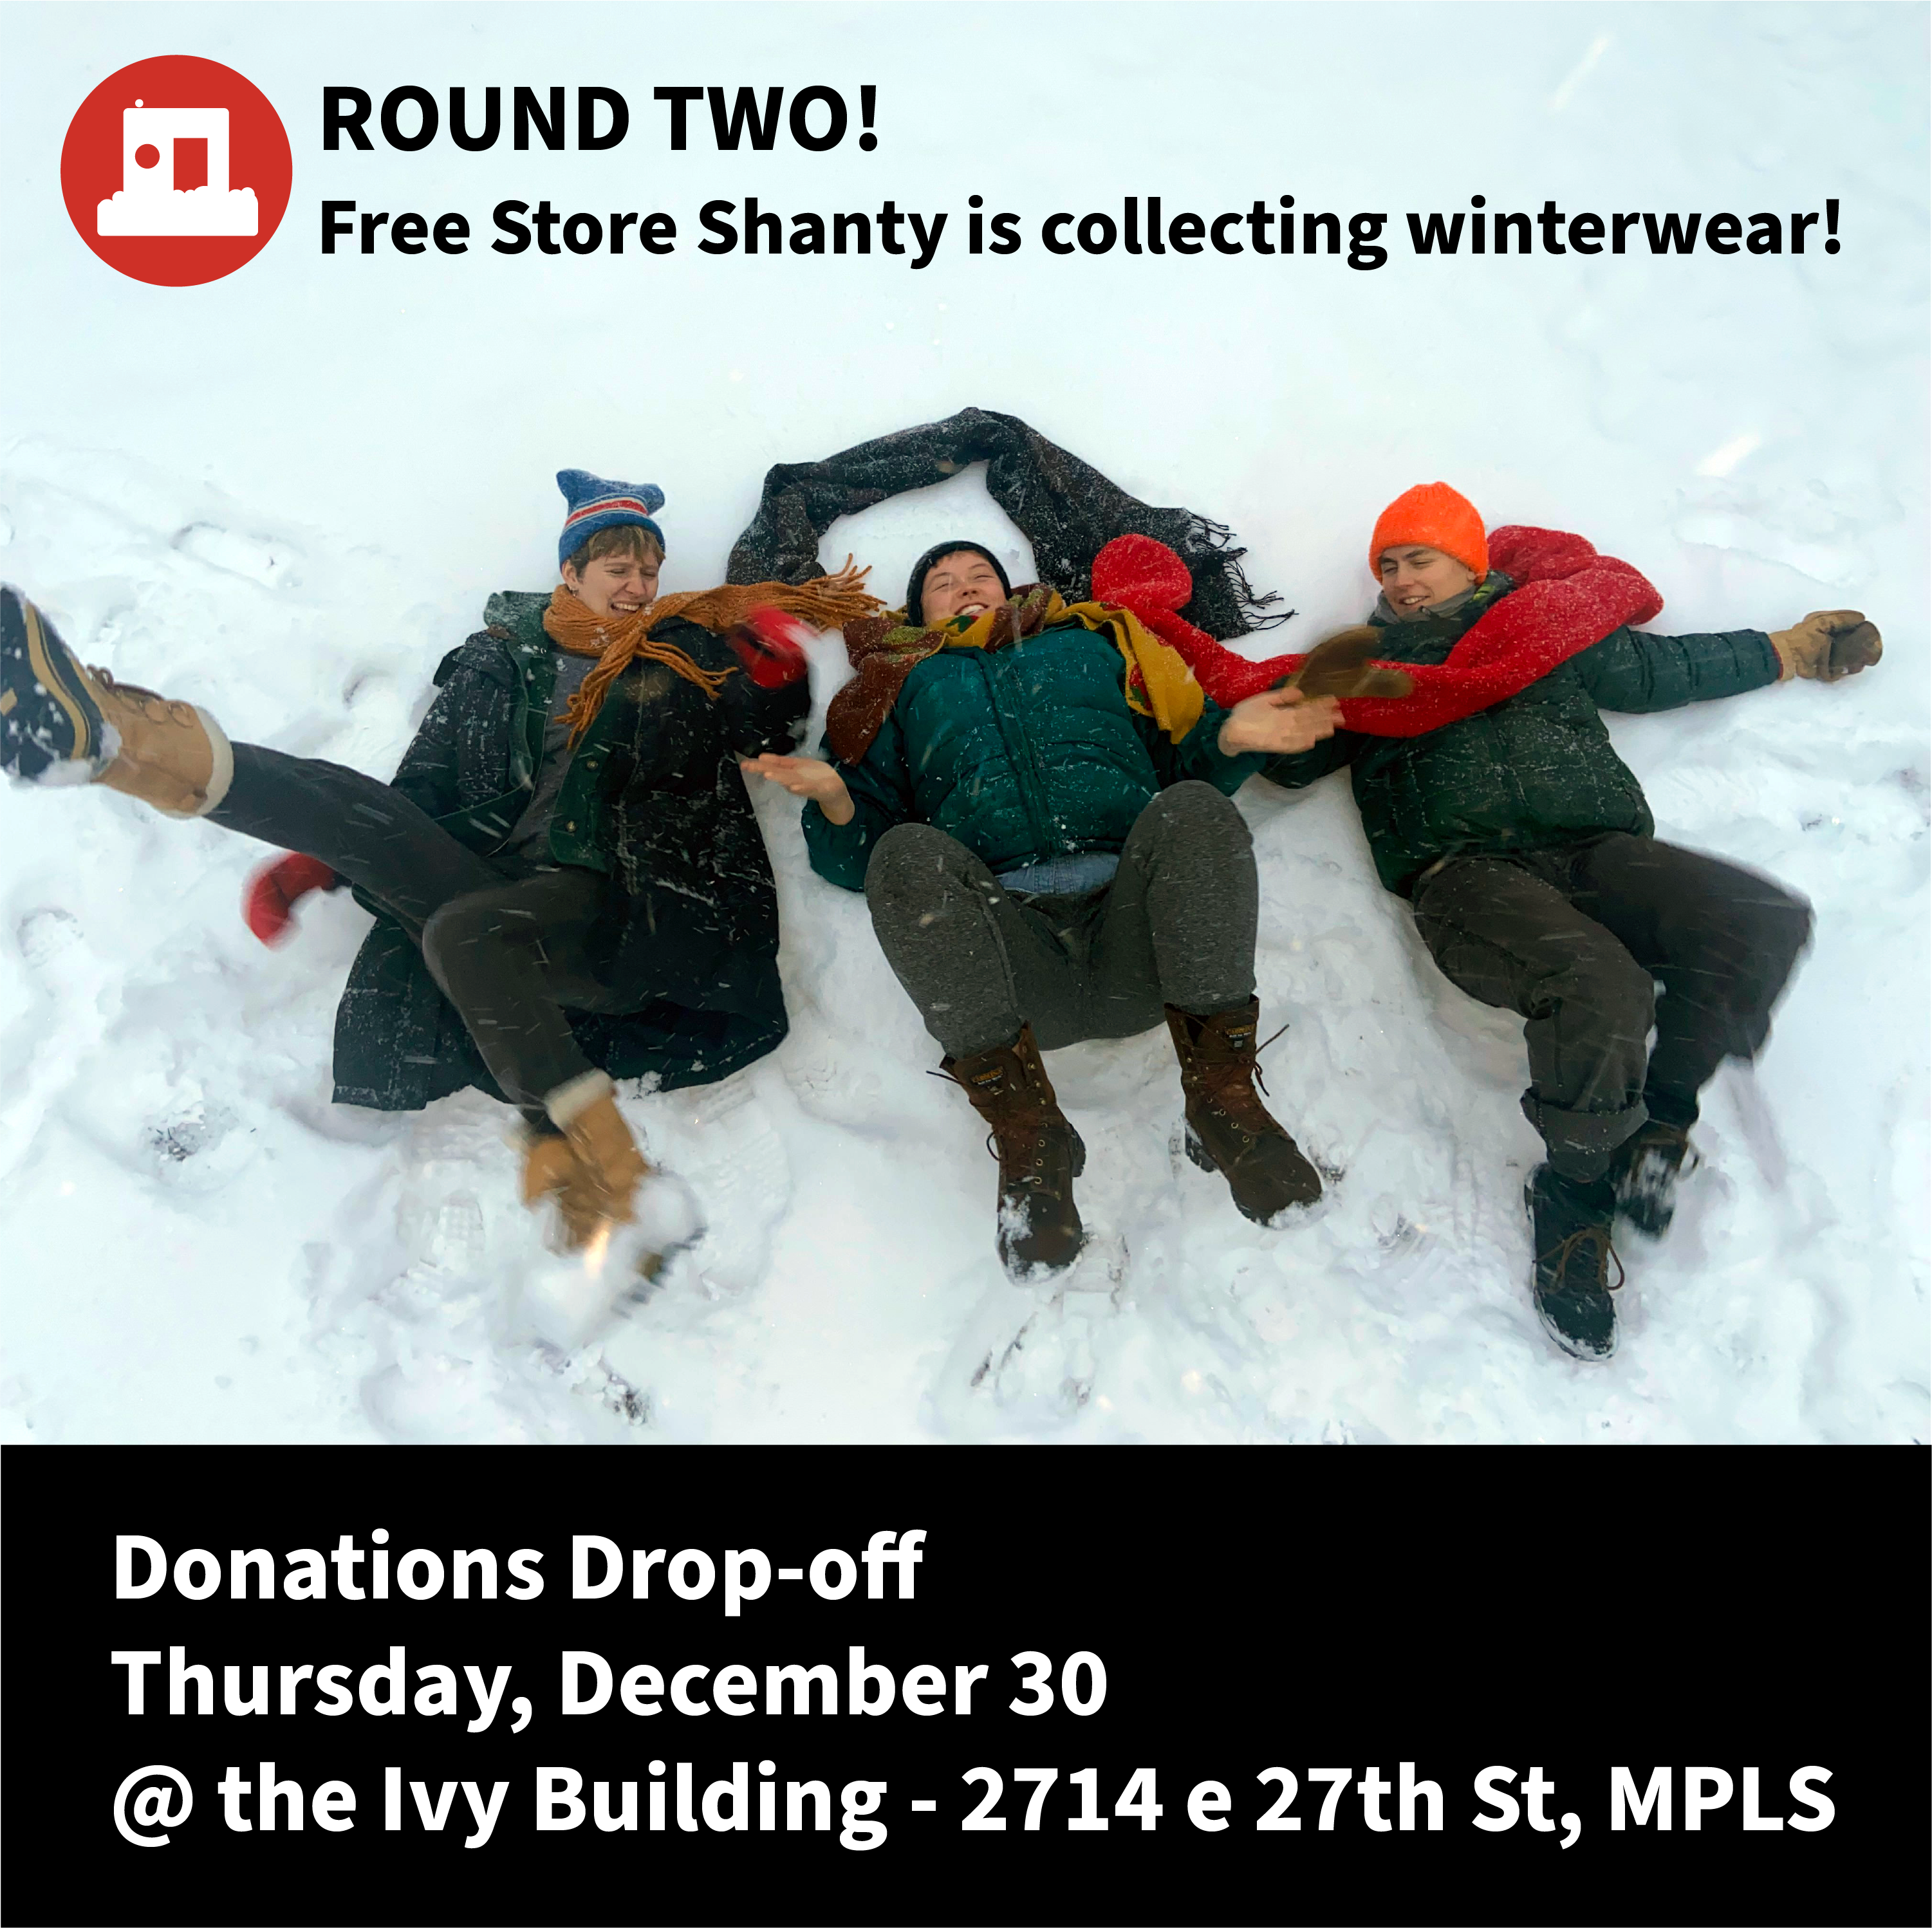 Free Store Shanty is collecting winterwear! (round two!)